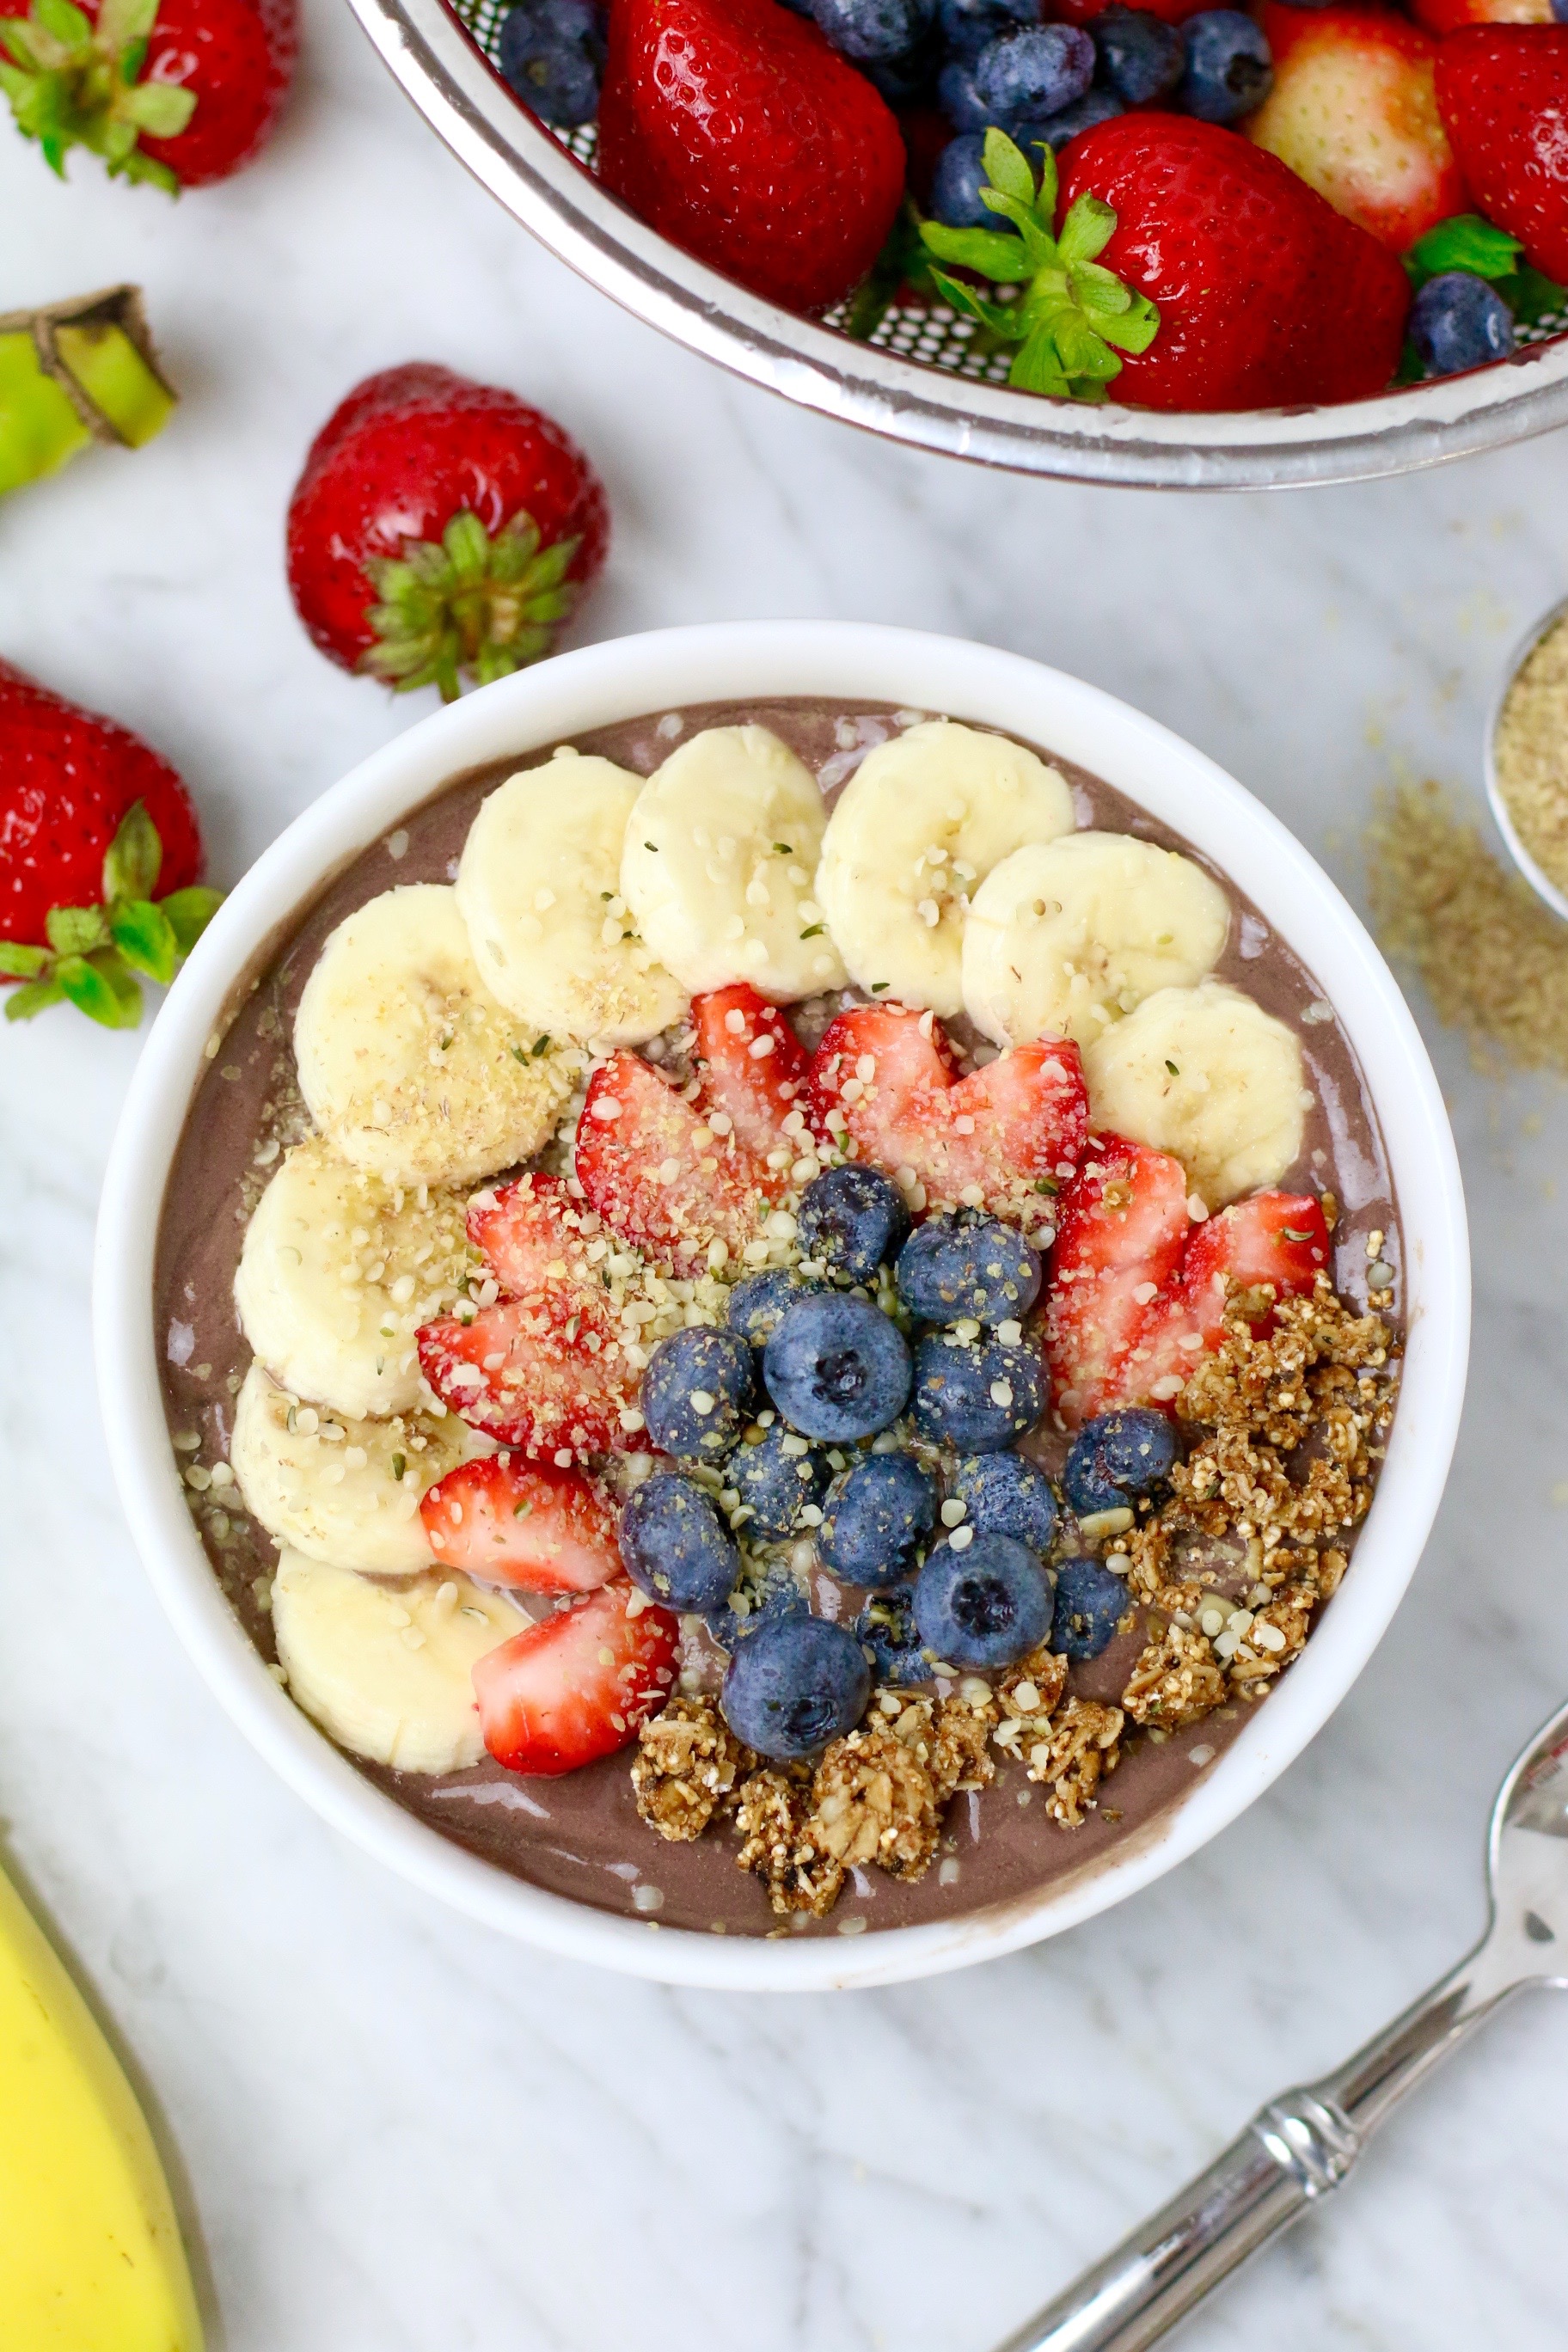 Trendy Acai Bowl Easy to Make - All We Eat